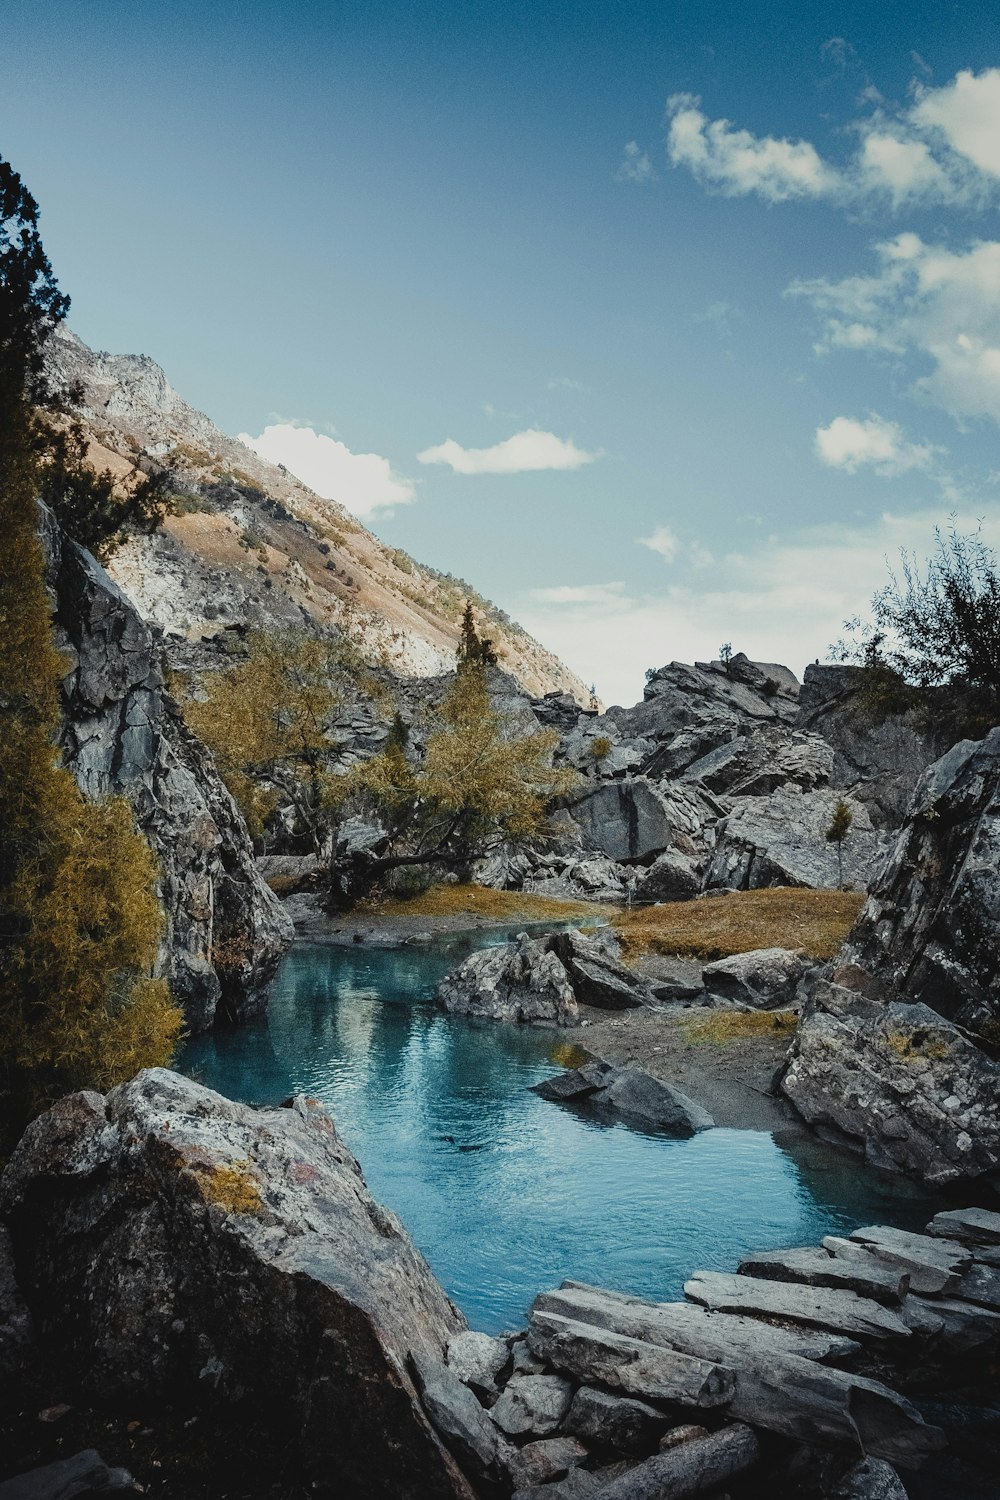 a blue pool surrounded by rocks and trees